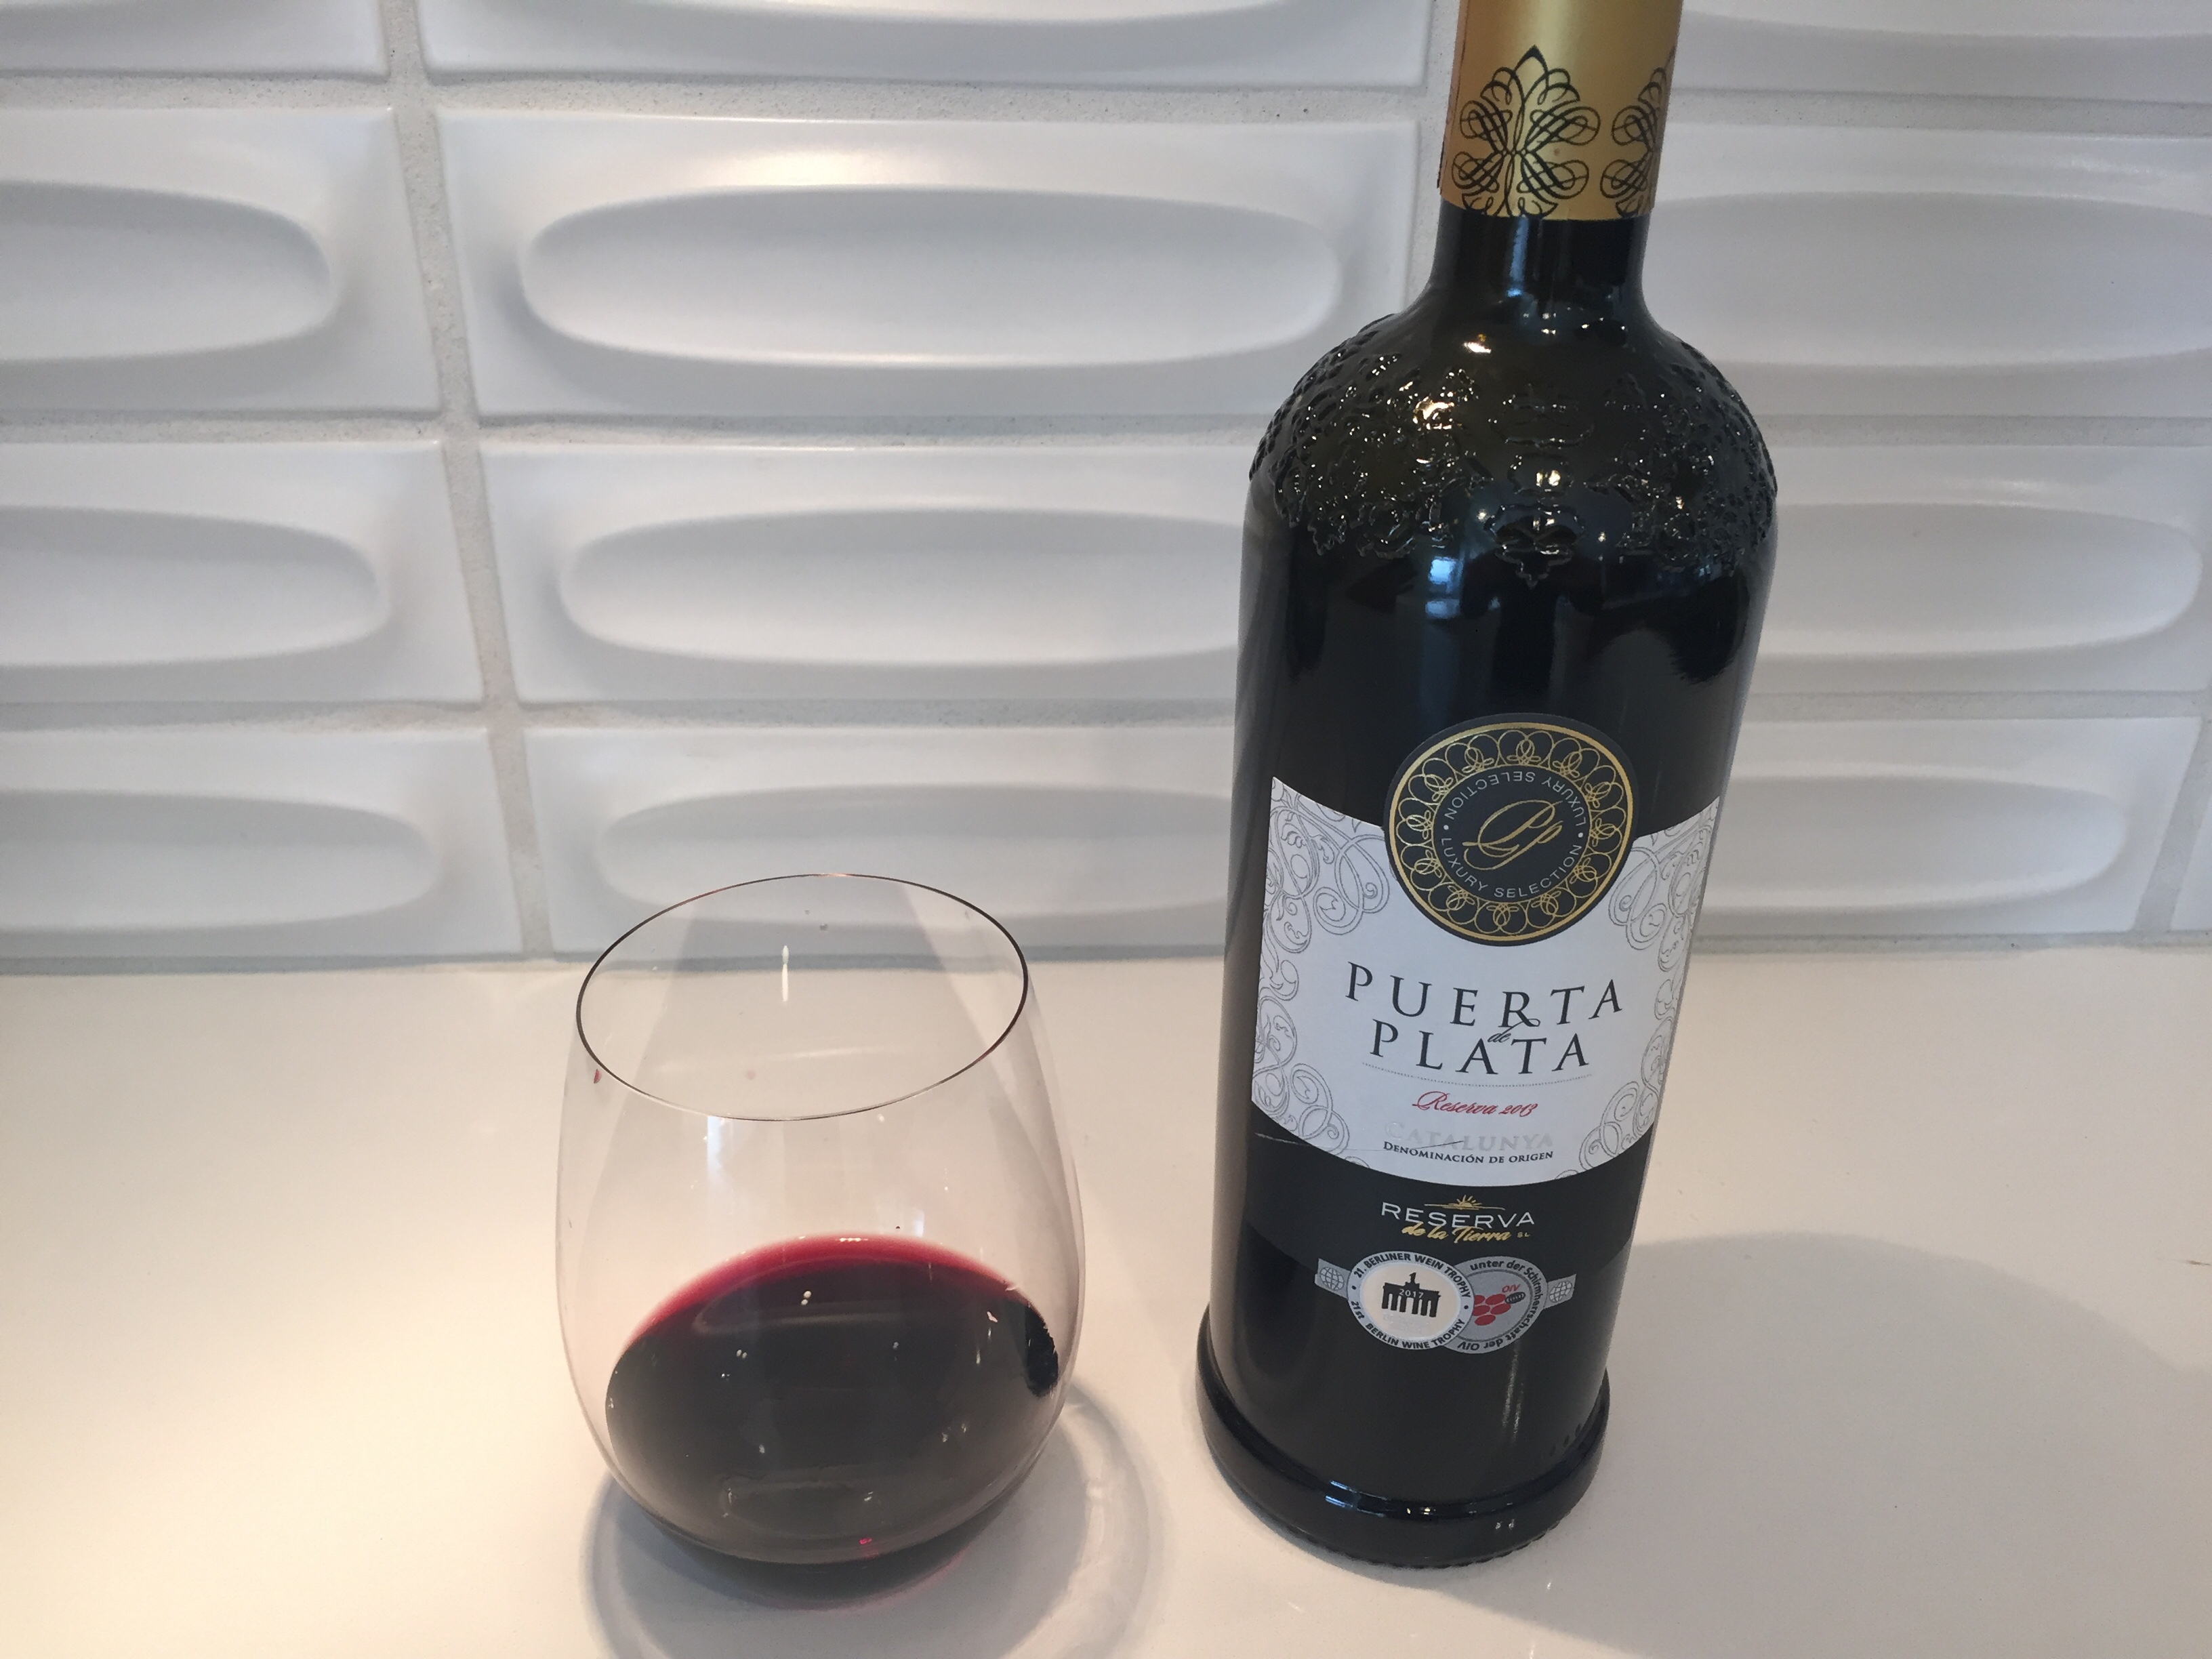 Glass and bottle of 2013 Puerta de Plata from Trader Joe's